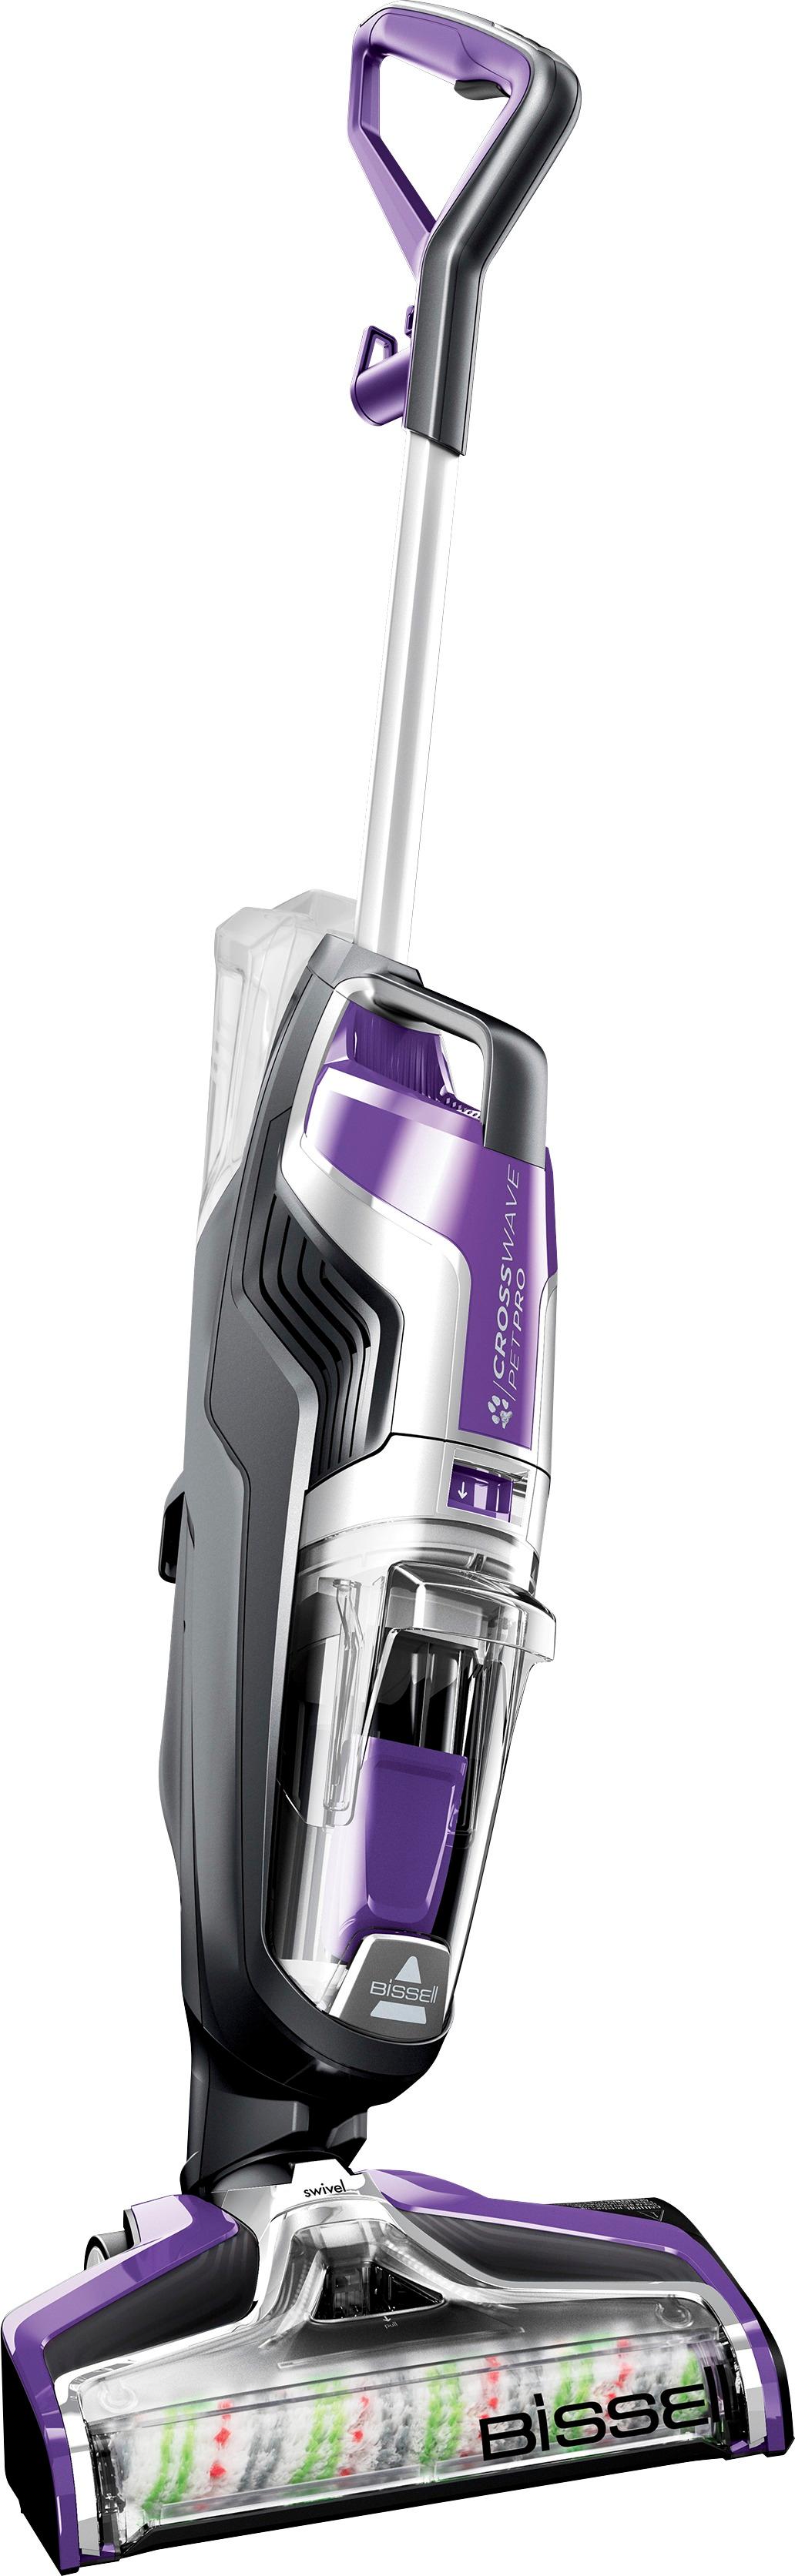 Angle View: BISSELL - CrossWave Pet Pro All-in-One Multi-Surface Cleaner - Grapevine Purple and Sparkle Silver